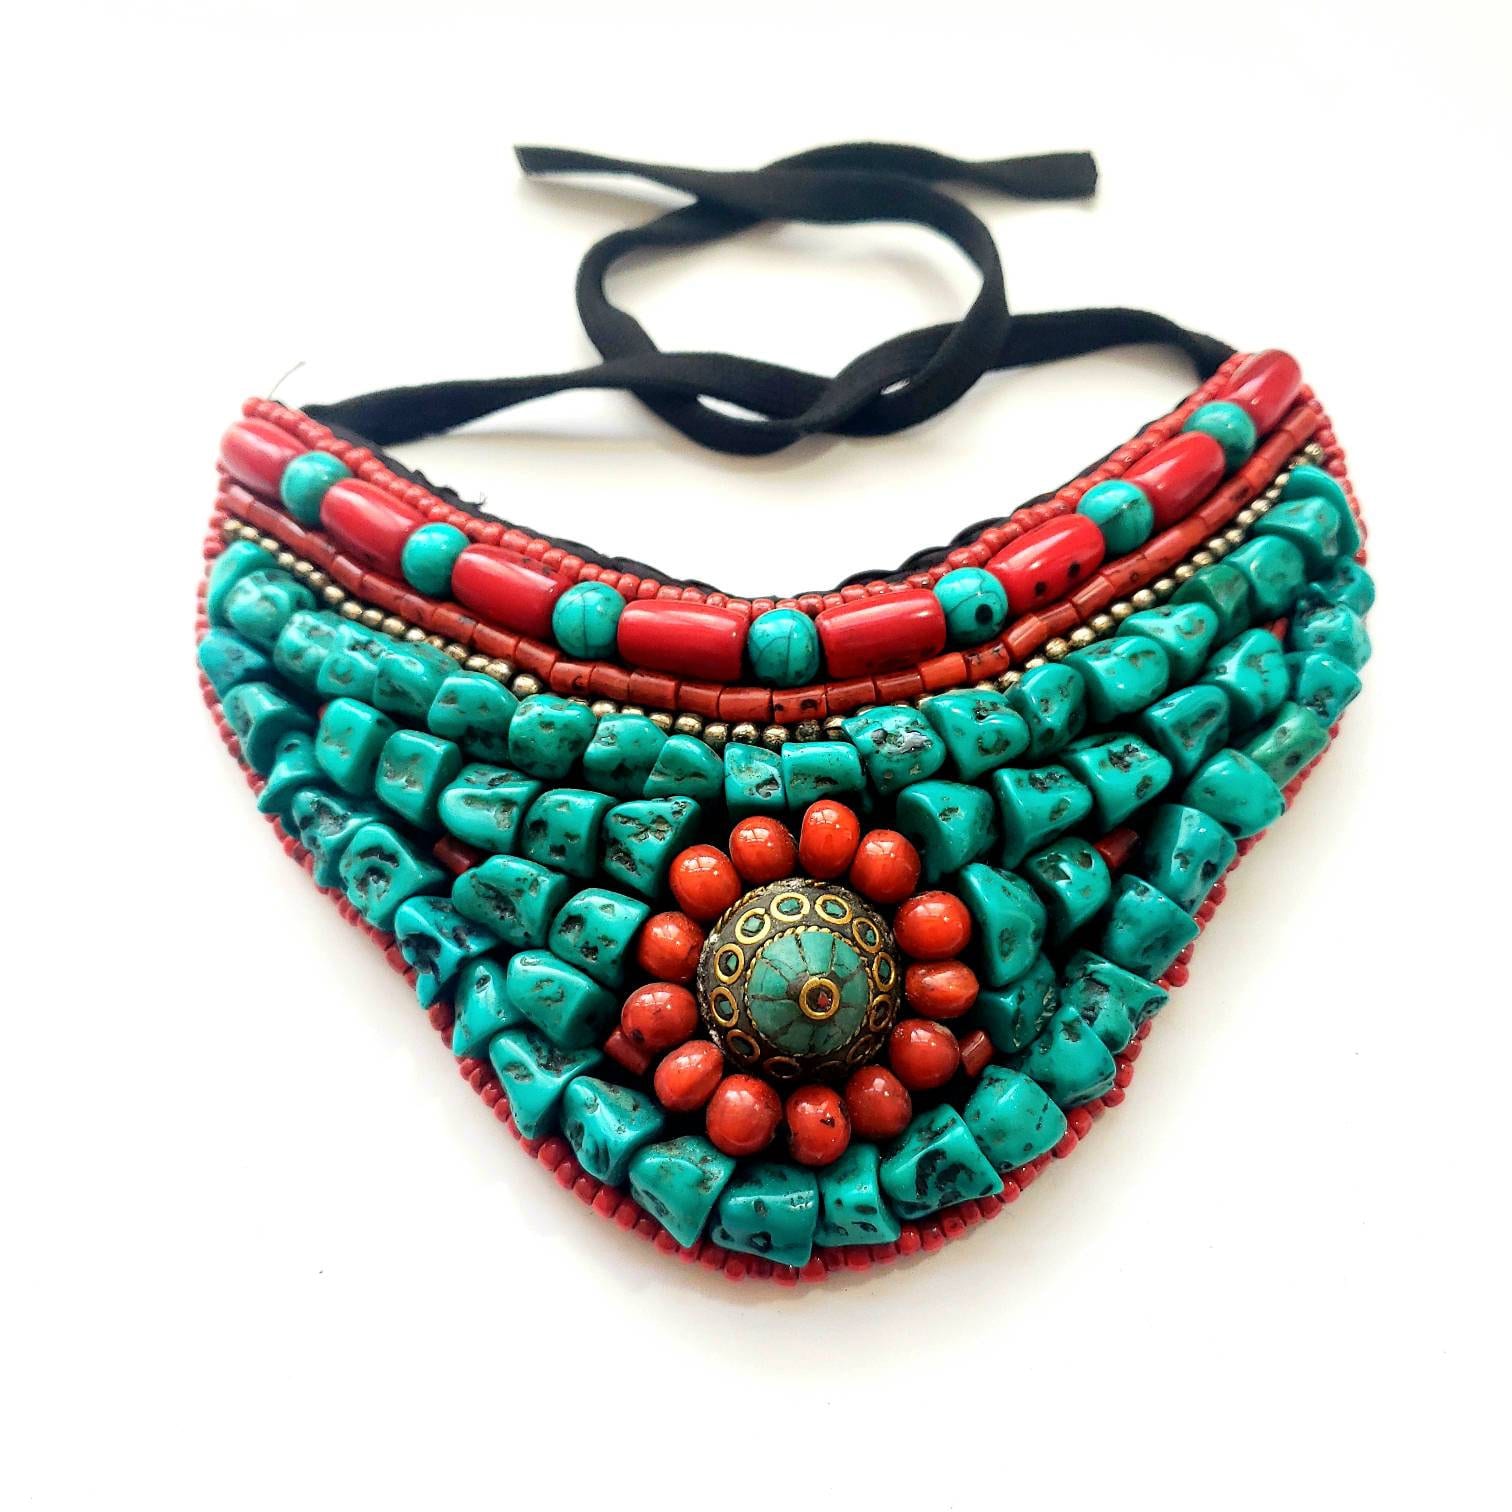 Buy Blue, Turquoise Bib Necklace, Good Bib Statement Necklace Online in  India - Etsy